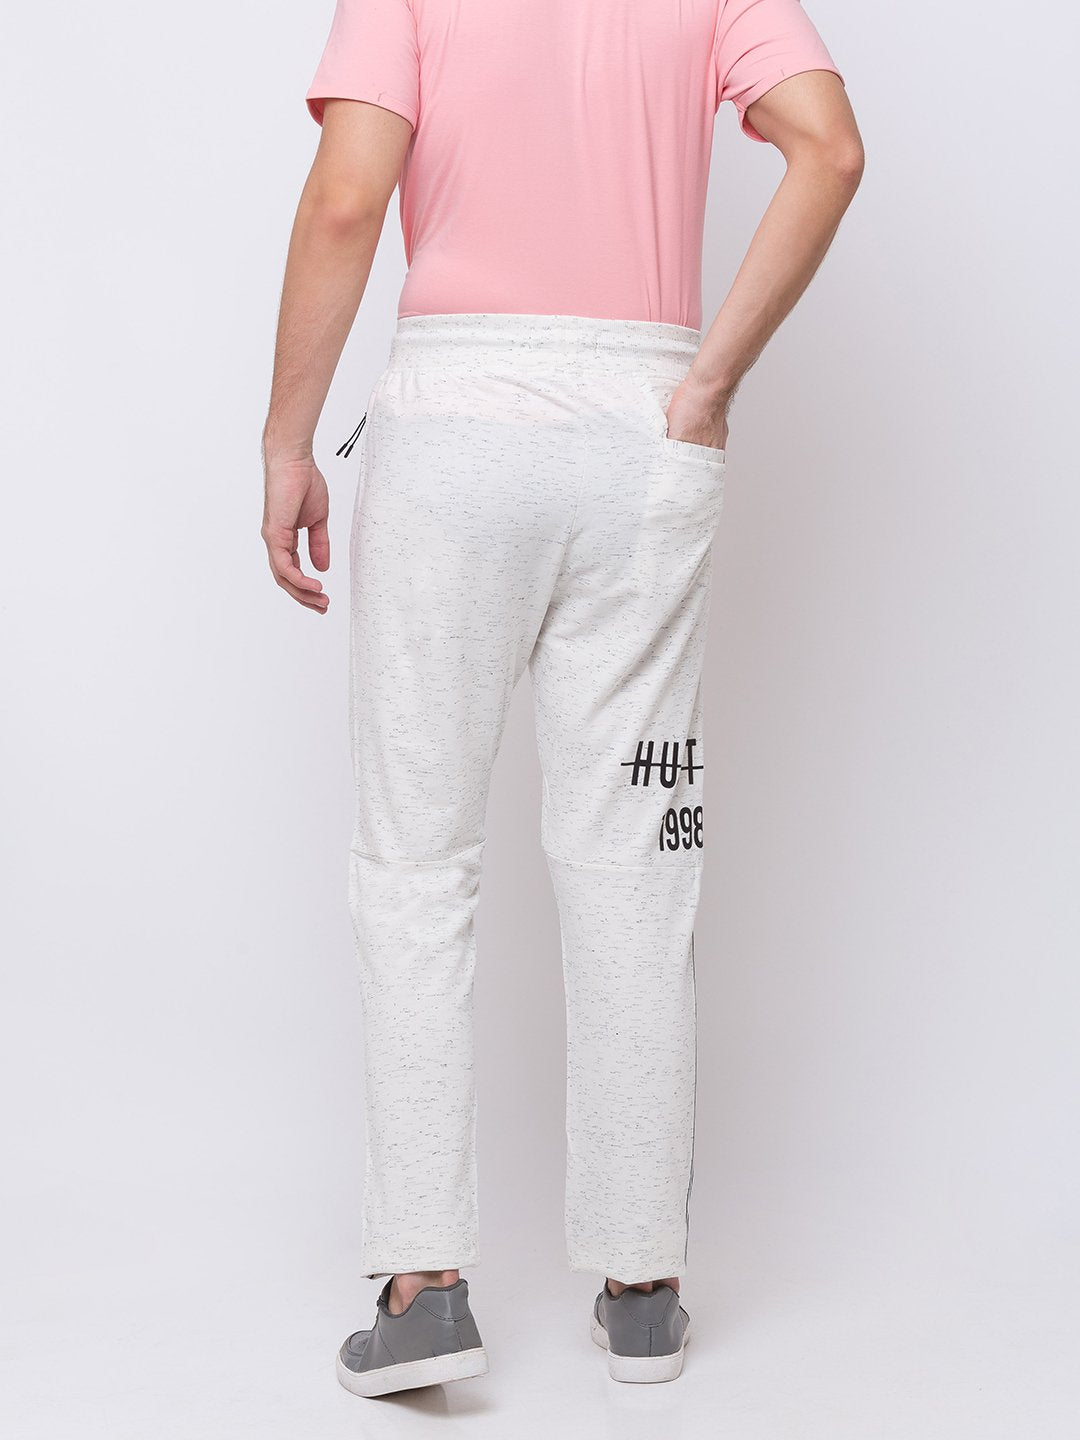 Buy Solid White Track Pants Joggers for Men – Metal Hawk